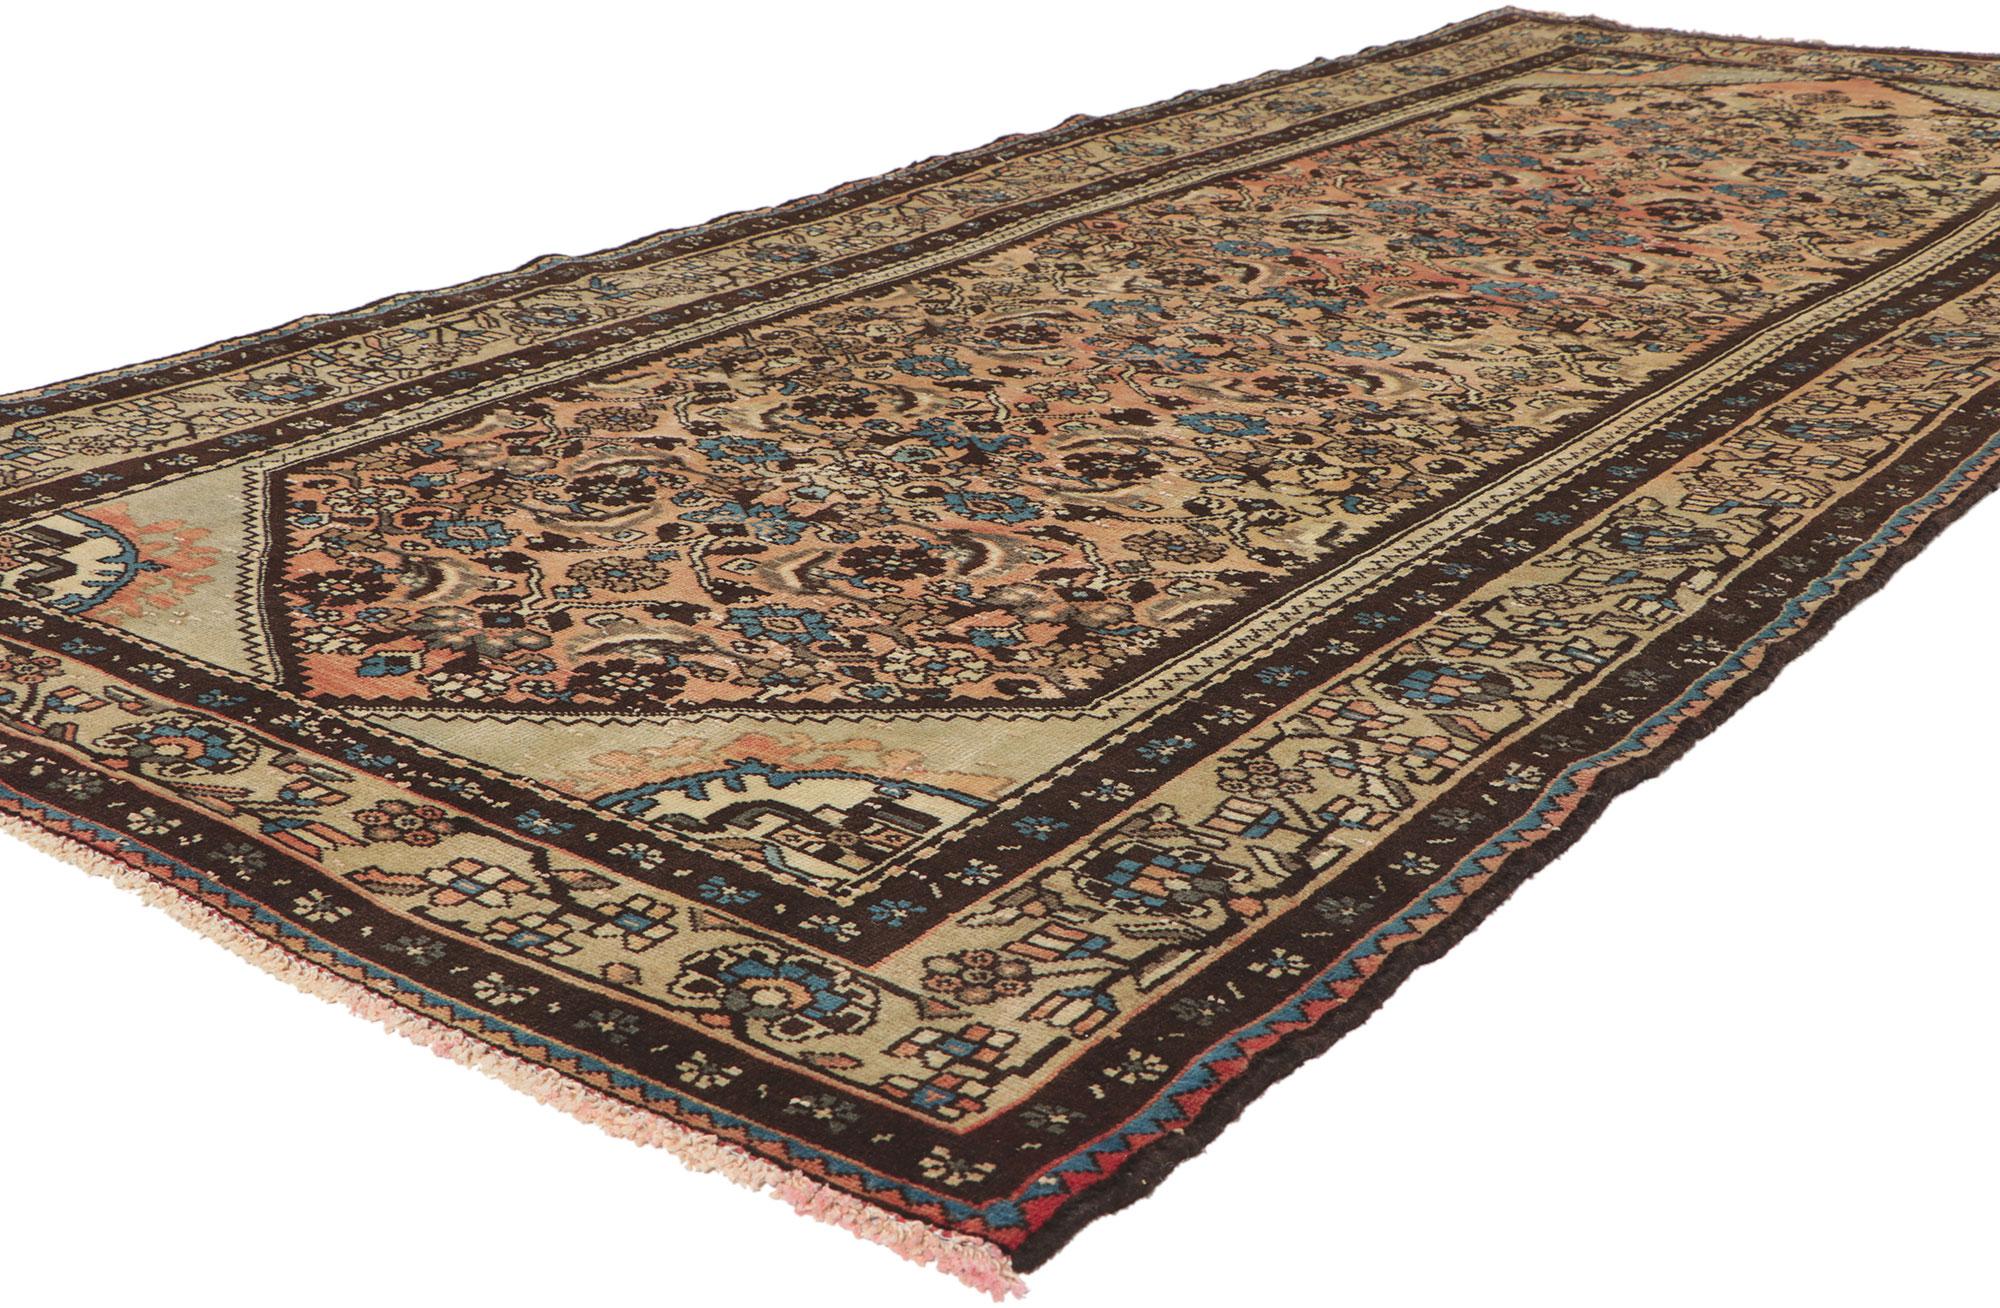 61153 Vintage Persian Hamadan Rug, 04'05 x 10'00.
With its effortless beauty and timeless design, this hand-knotted wool vintage Persian Hamadan rug is poised to impress. The eye-catching Herati pattern and sophisticated color palette woven into